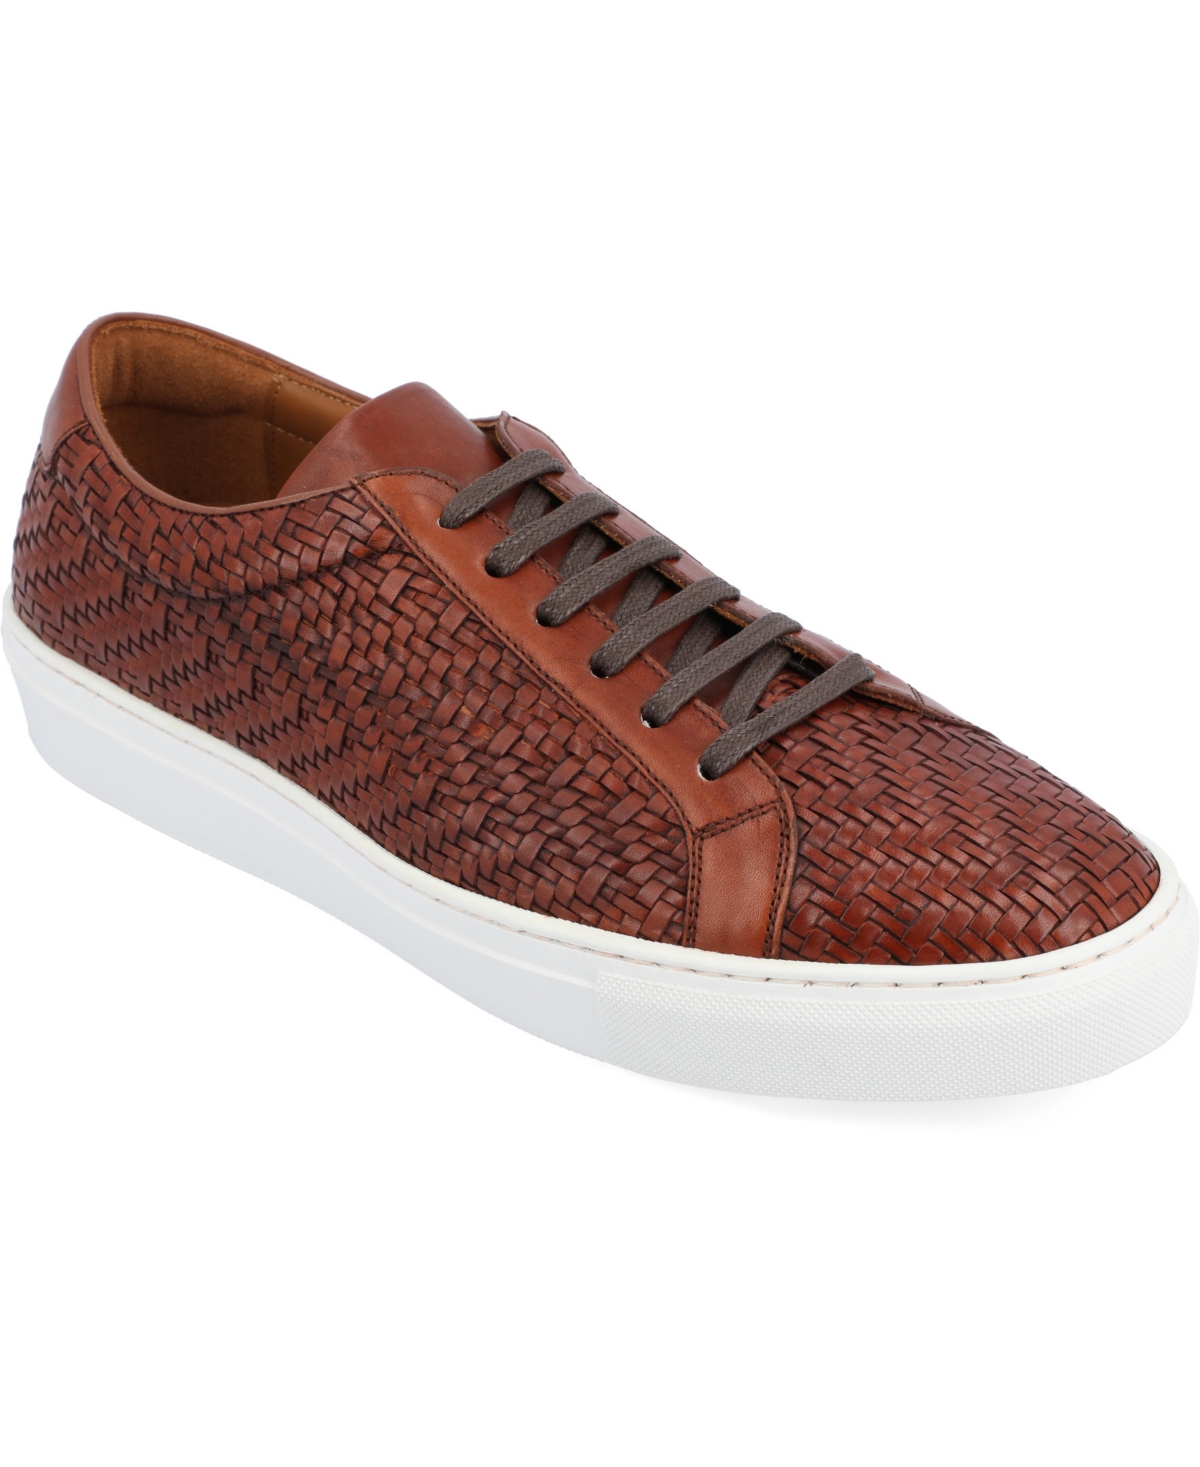 Men's Woven Handcrafted Leather Low Top Lace-up Sneaker - Brown Wove